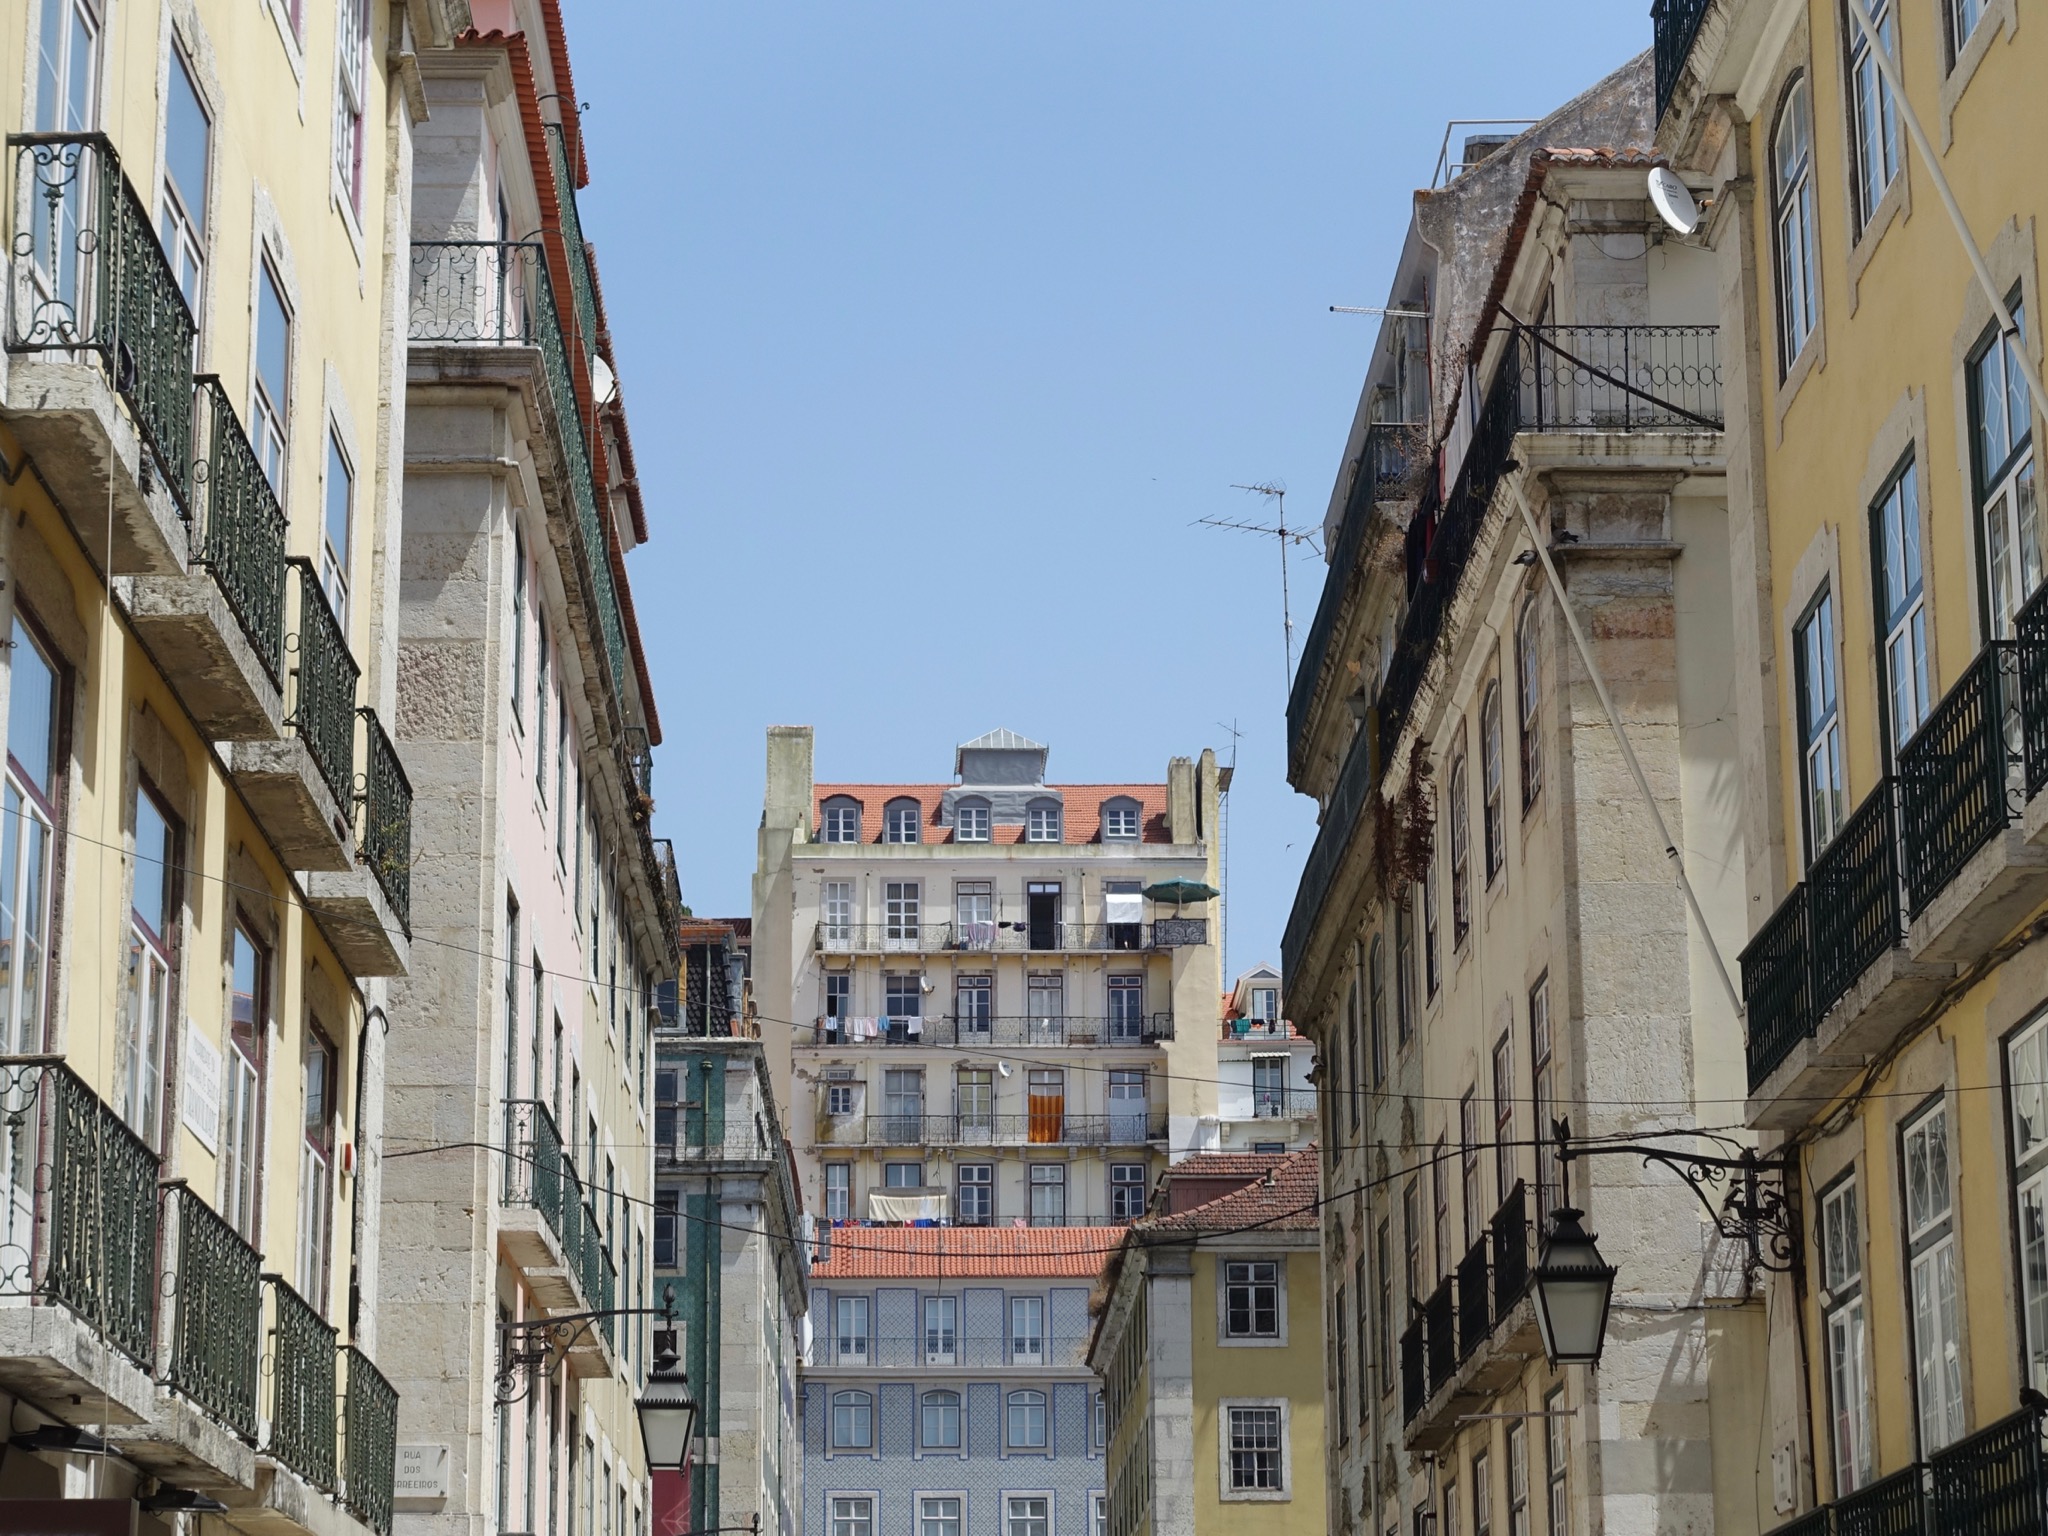 Photo 44 of 86 from the album Highlights Lisbon 2015.